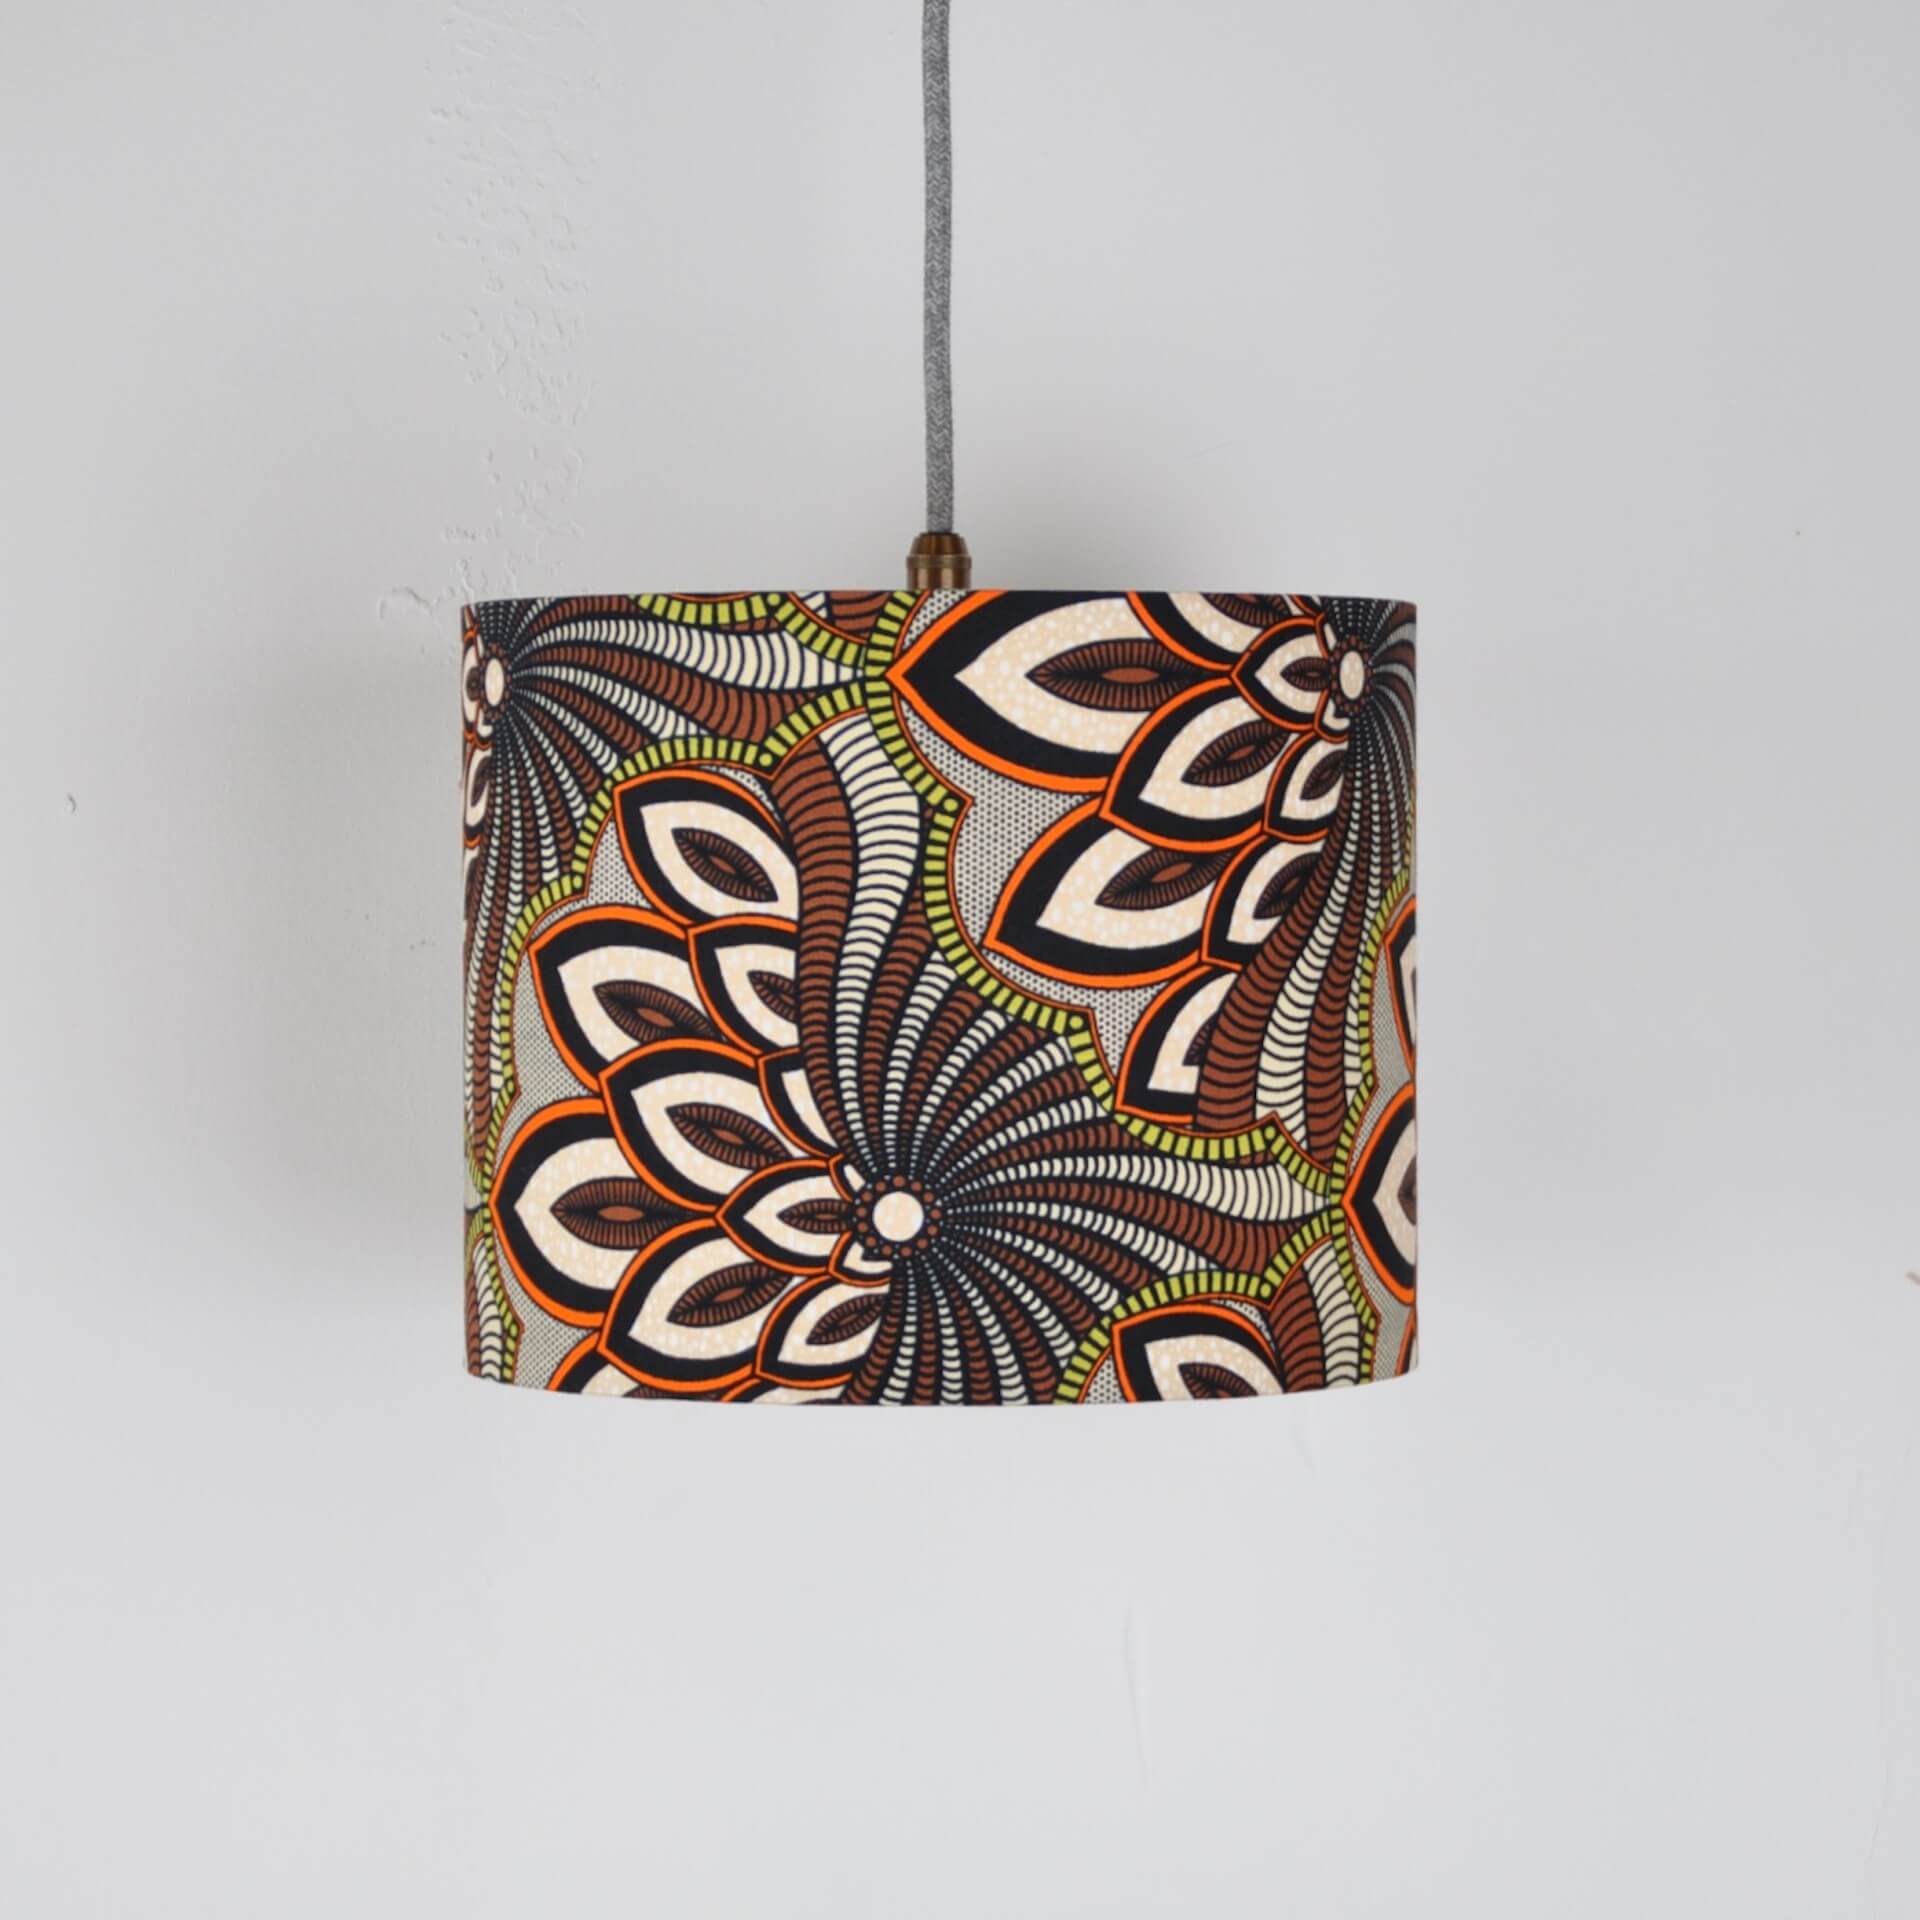 Colourful Shadez Bristol ⌀ 25cm x H 20cm African Print Lampshade - Brown Peacock Feather (various sizes)